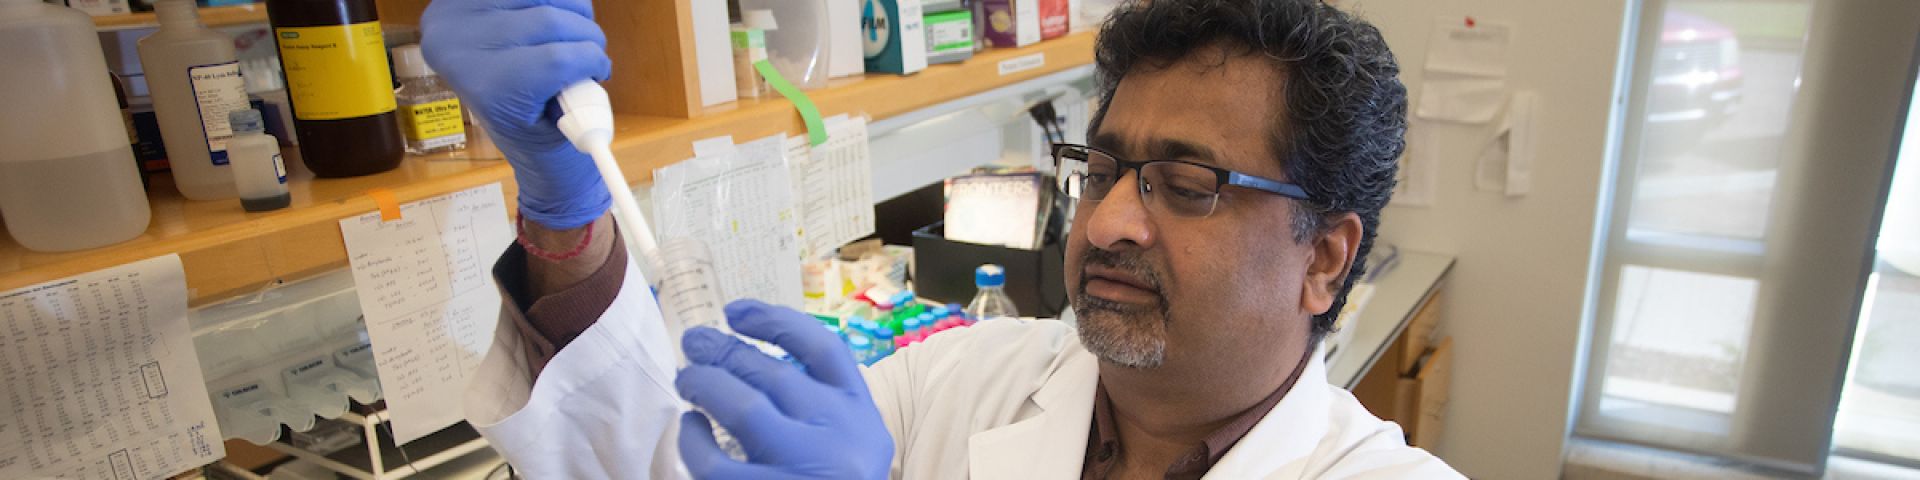 Ajay Singh, Ph.D., a cancer researcher at the USA Health Mitchell Cancer Institute and a professor of pathology at the University of South Alabama Frederick P. Whiddon College of Medicine, received a $1.39 million grant from the U.S. Department of Defense to study racial disparities in prostate cancer.